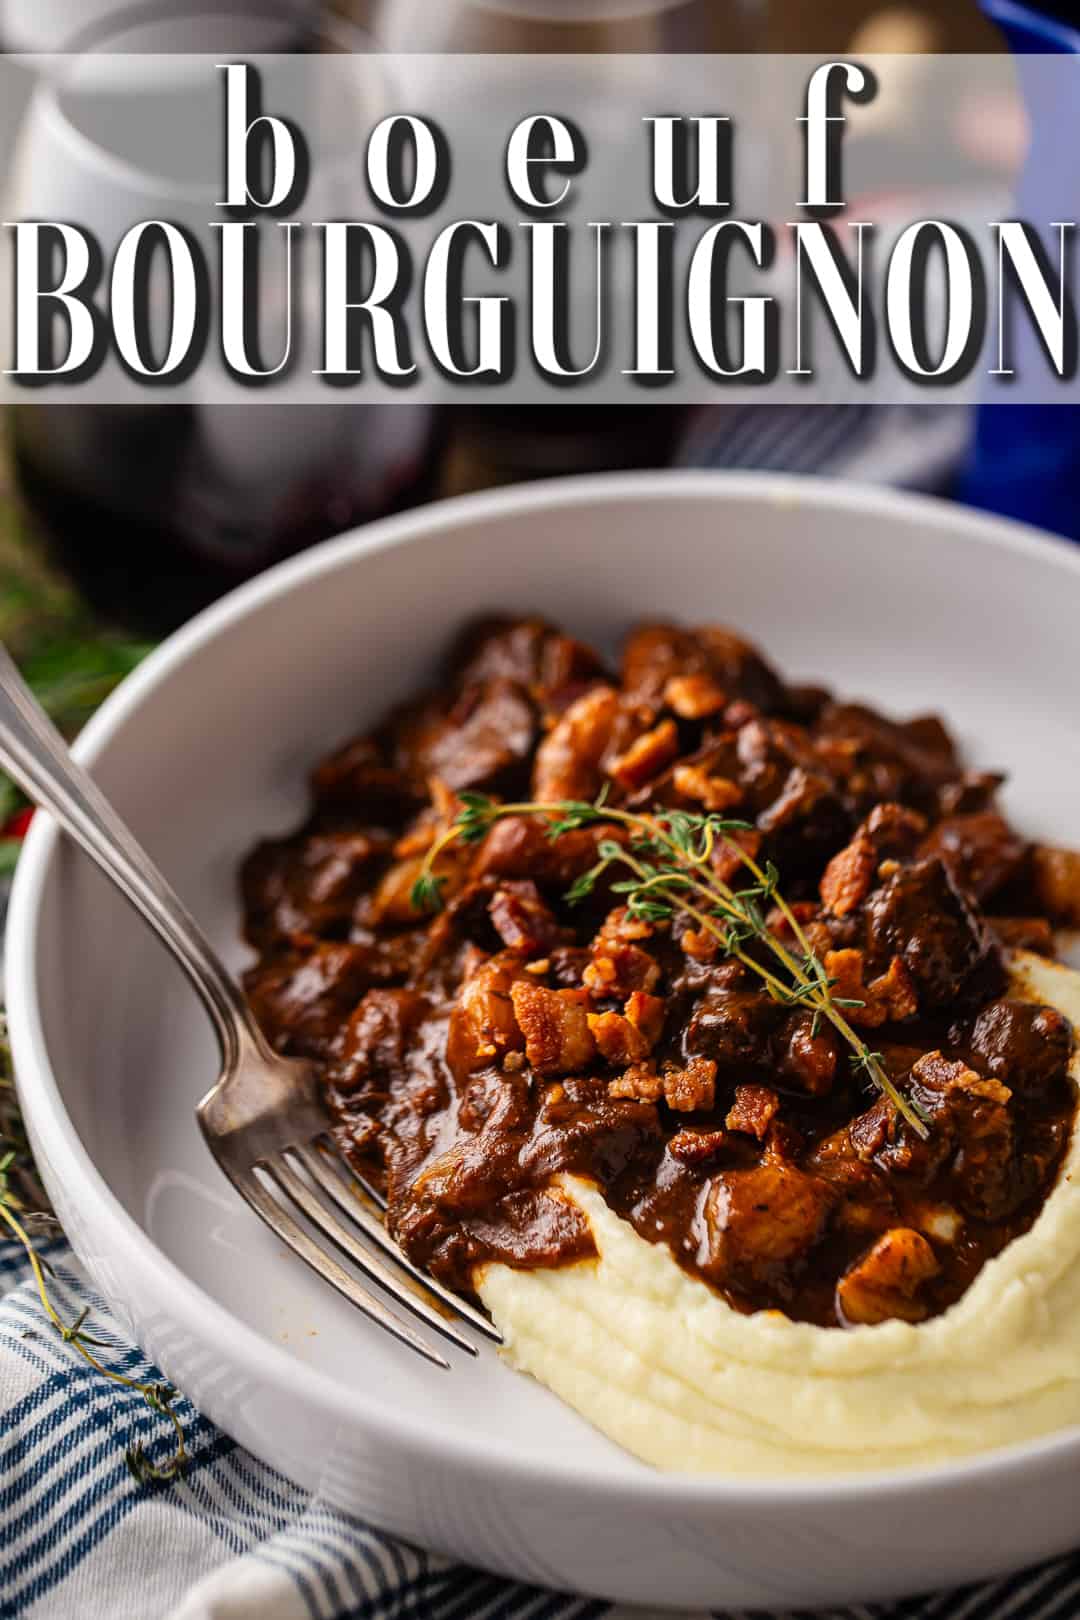 Authentic boeuf bourguignon, presented in a shallow ceramic bowl with creamy mashed potatoes.